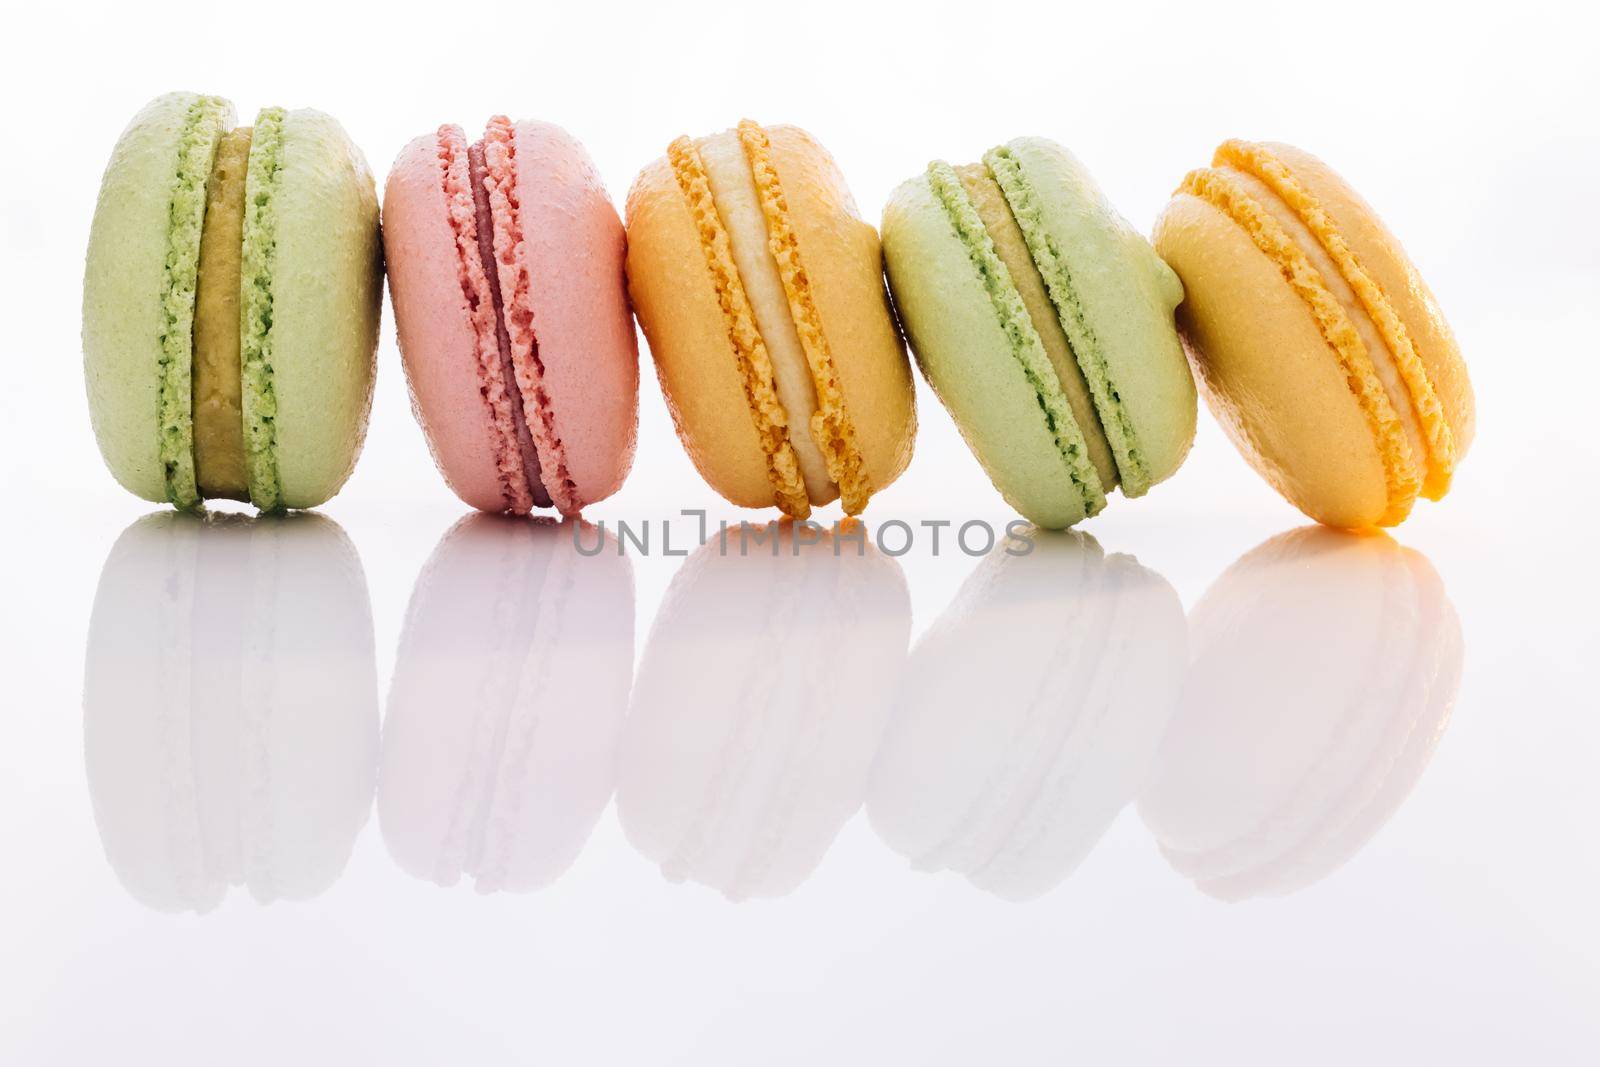 Tasty sweet color macaron. Colorful macarons dessert. French macarons on white background. Different colorful macaroon.